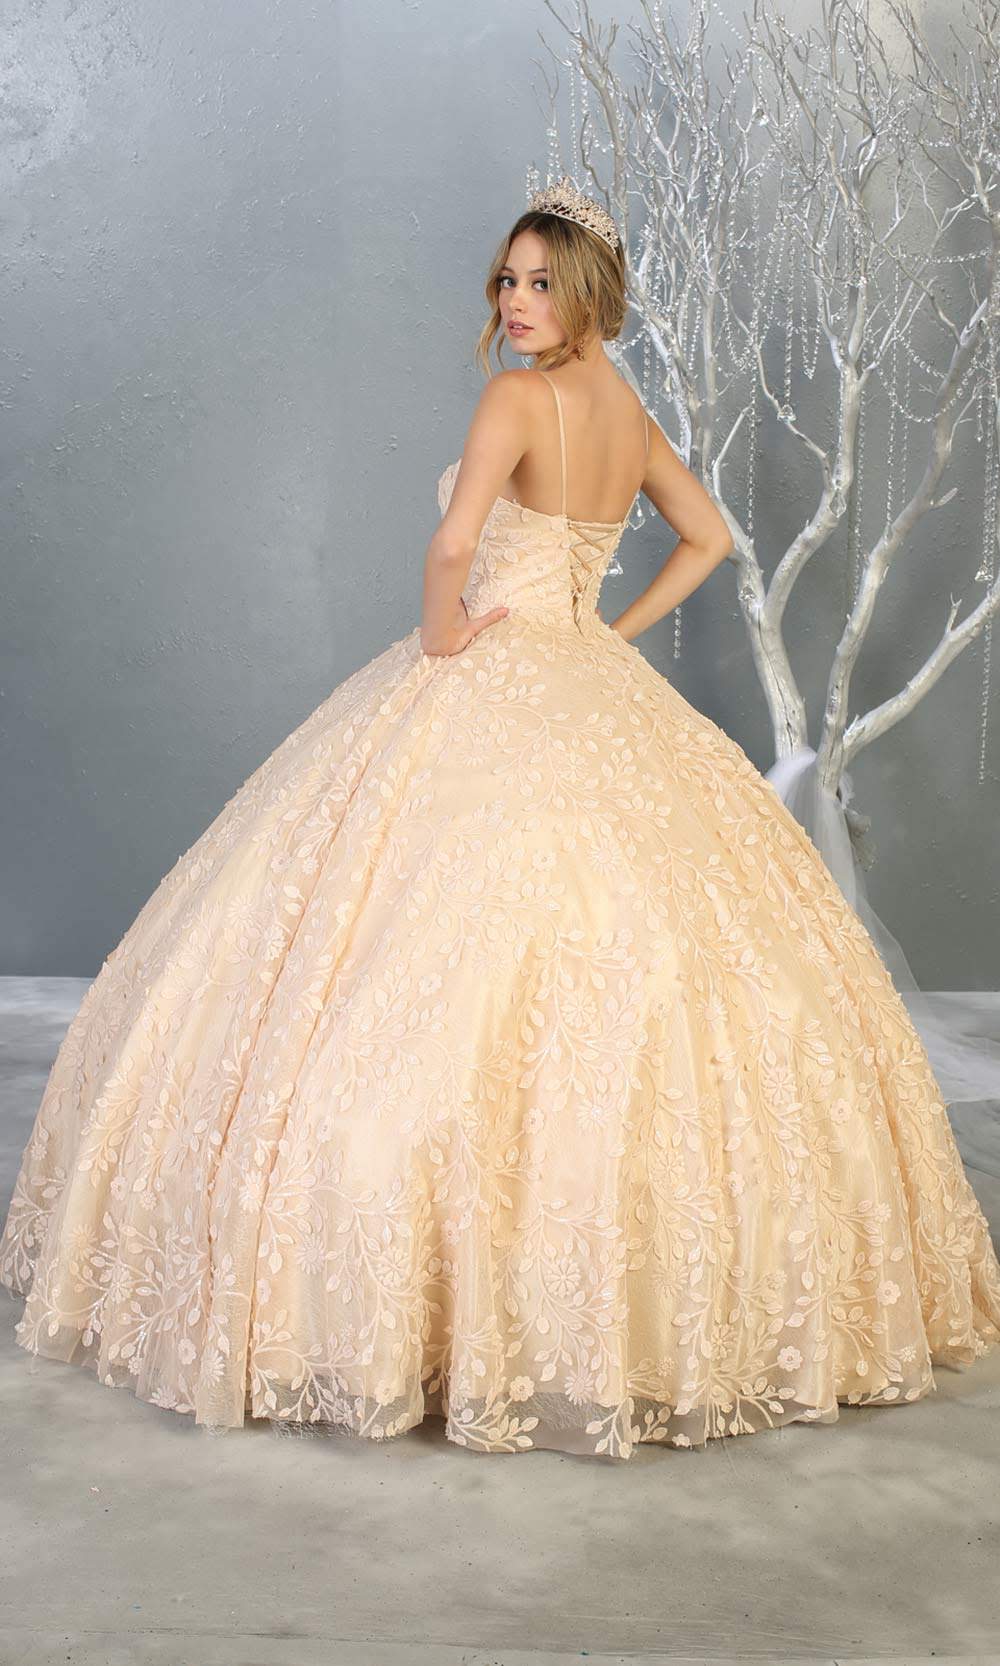 Mayqueen LK150 champagne quinceanera ball gown w/lace detail & thin straps. This light gold ball gown is perfect for engagement dress, wedding reception, indowestern party gown, sweet 16, debut, sweet 15, sweet 18. Plus sizes available for ballgowns-b.jpg